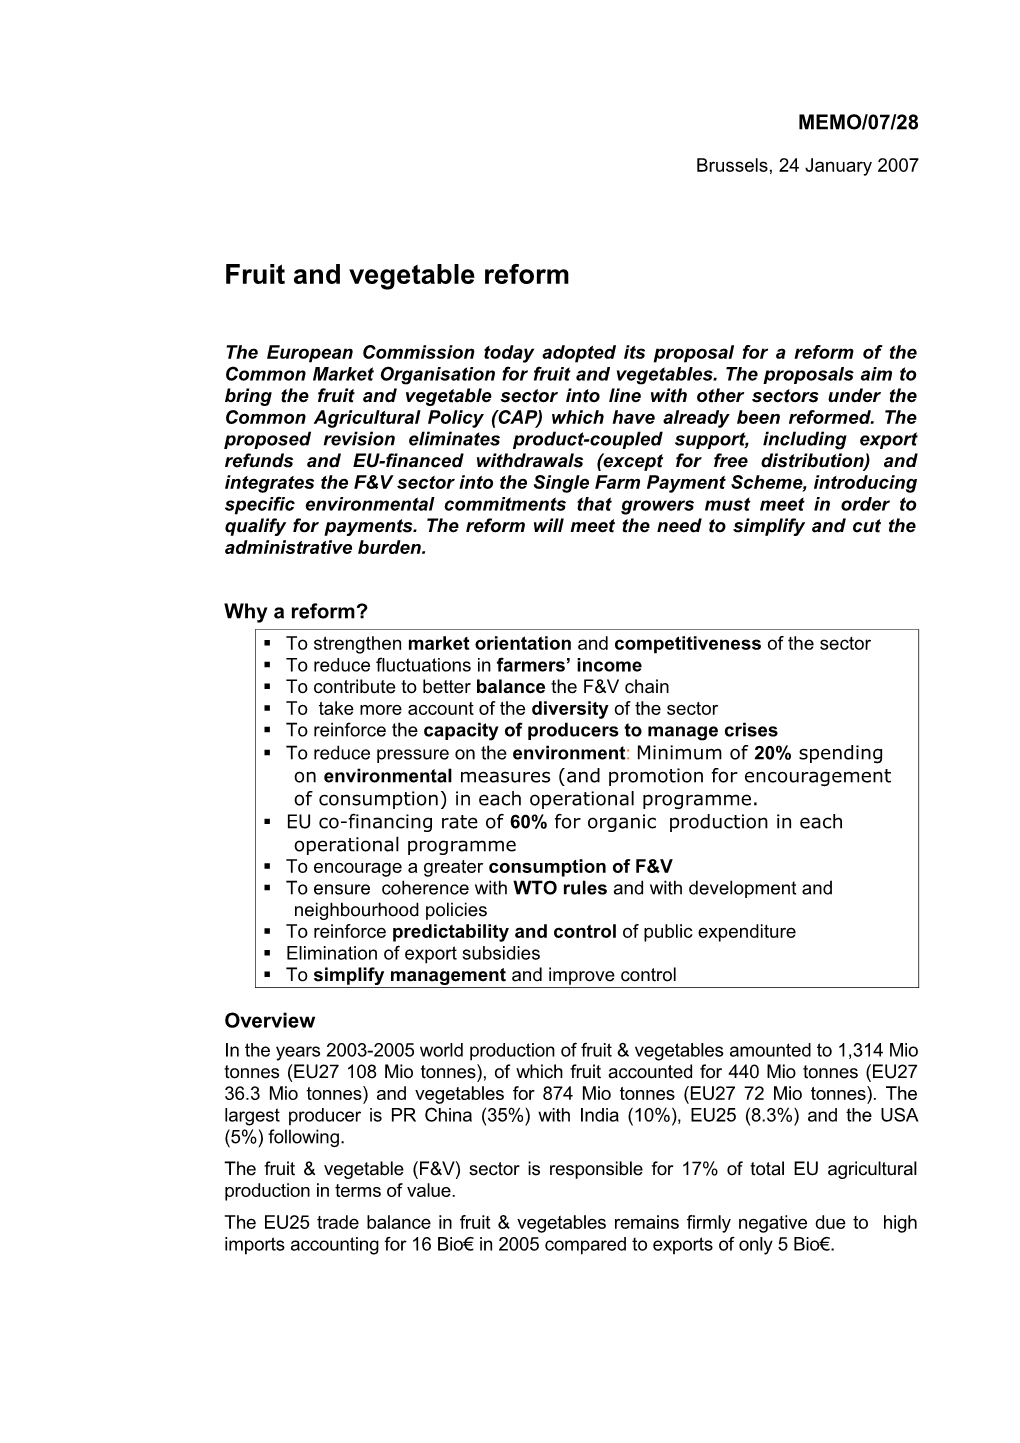 Fruit and Vegetable Reform